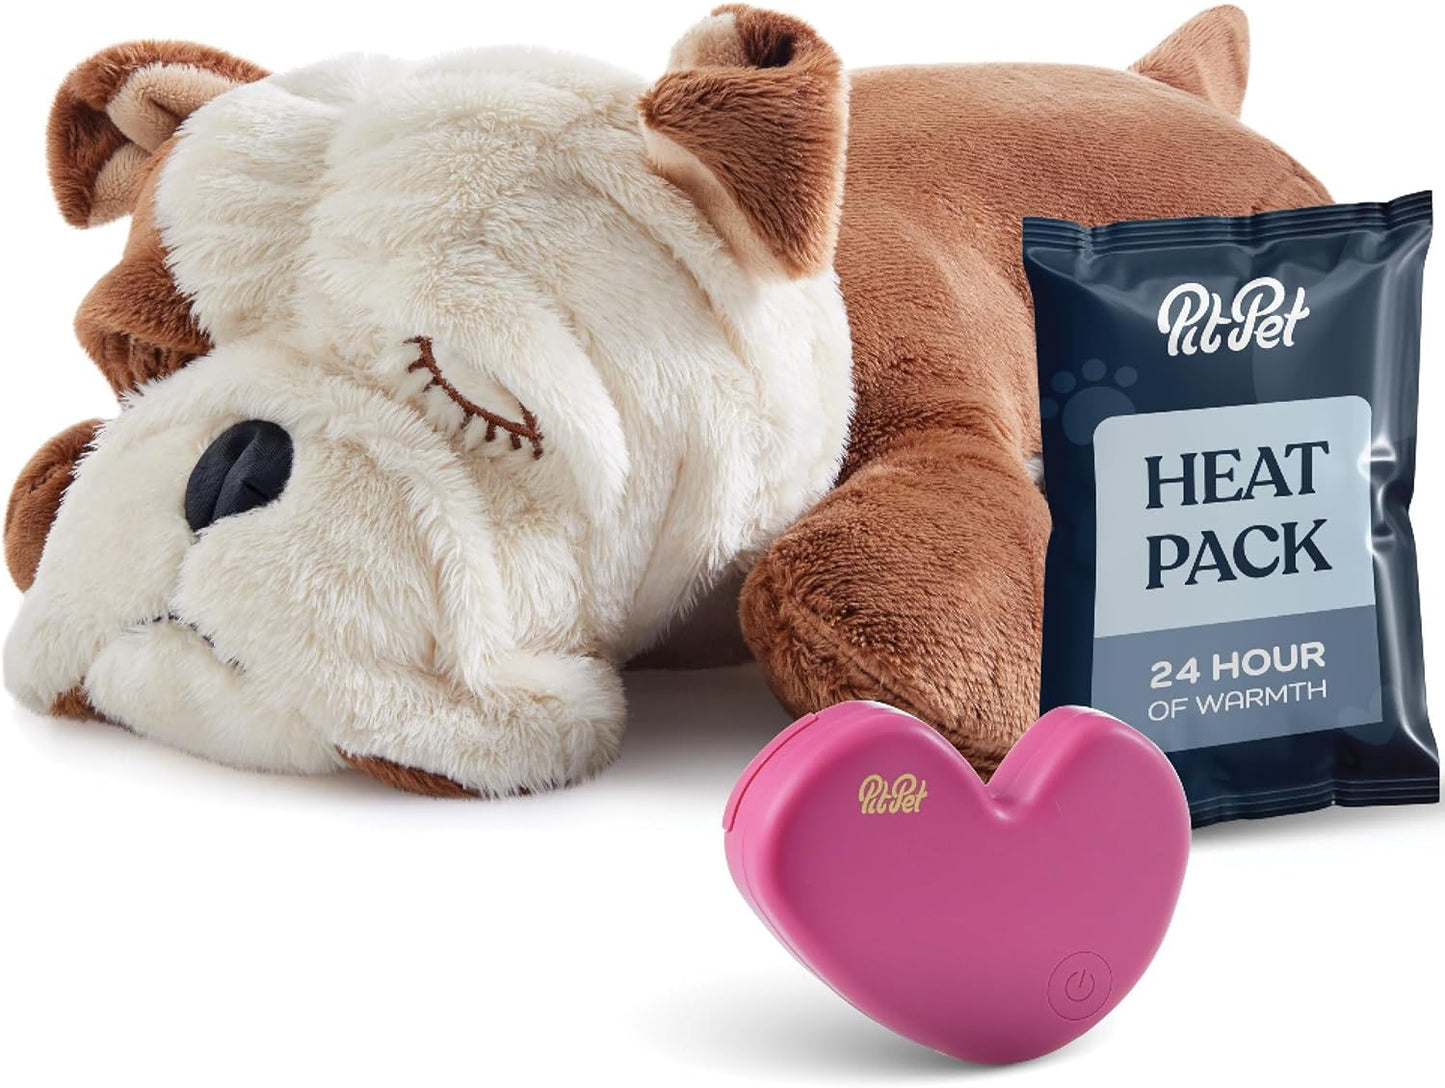 Heartbeat Plush Dog Toy - Heartbeat Helps for Dog Anxiety Relief and Calming Aid - Stuffed Dog Toys with Disposable Heat Pack - Comfort Toy for Puppy Dogs Cats Pets -Plush Toys for Dogs.